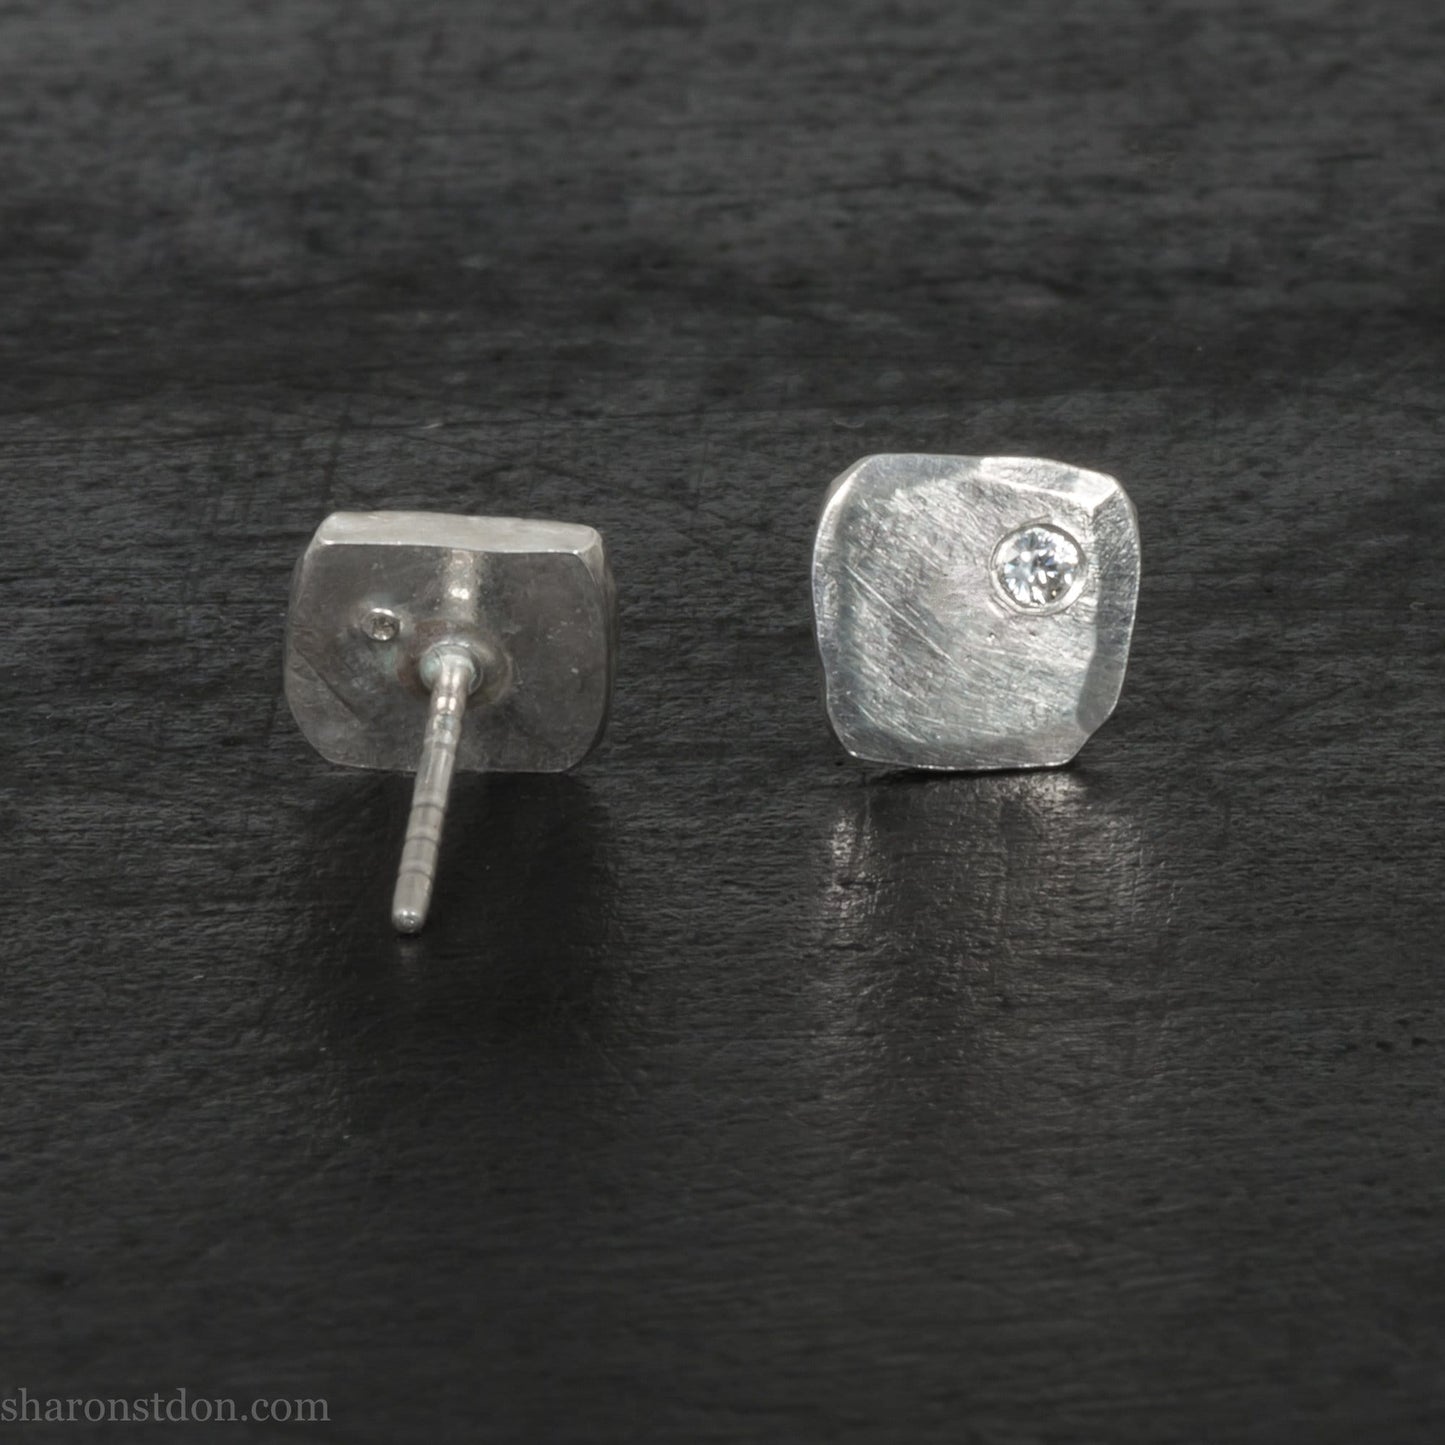 Handmade 925 sterling silver stud earrings with imitation diamond gemstones. Small square stud earrings made by Sharon SaintDon in North America.